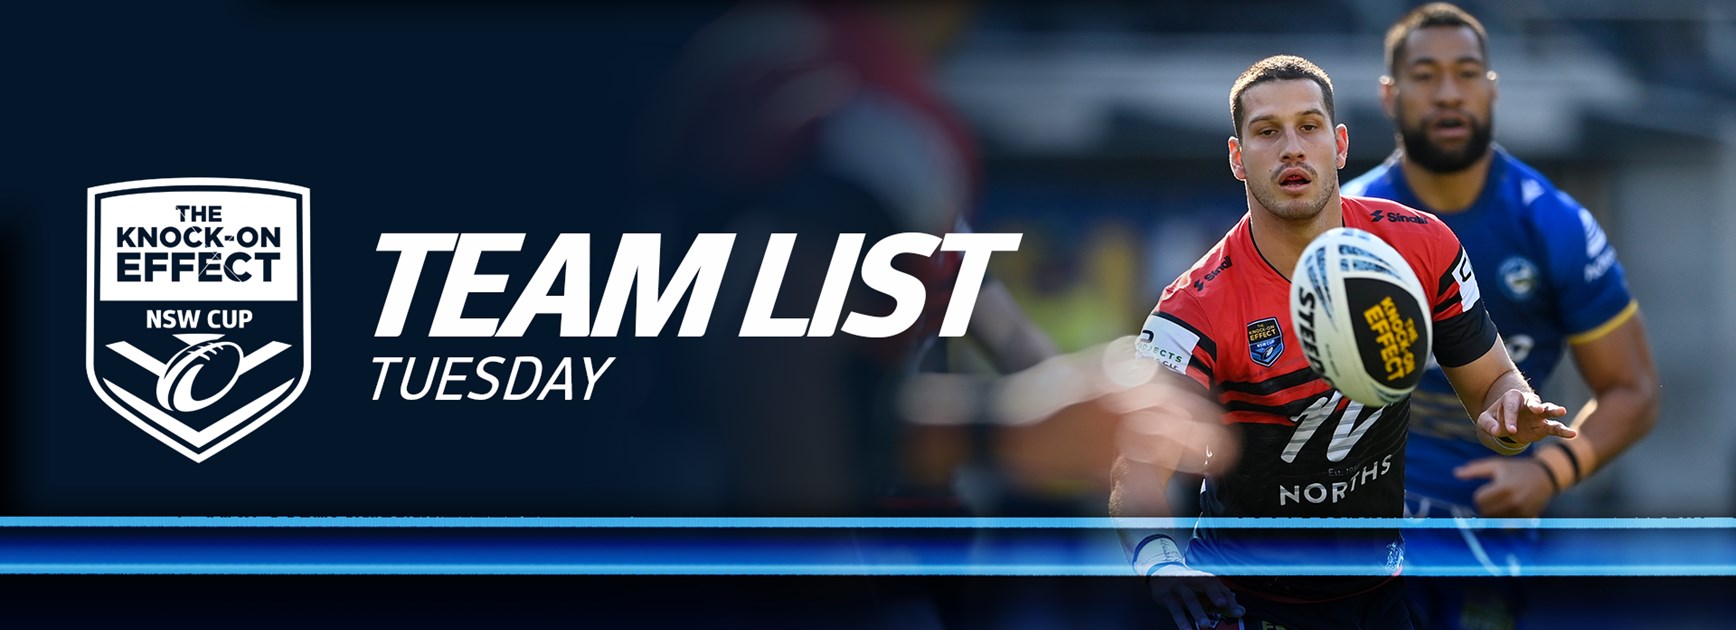 Team List Tuesday | The Knock-On Effect NSW Cup - Round Seven